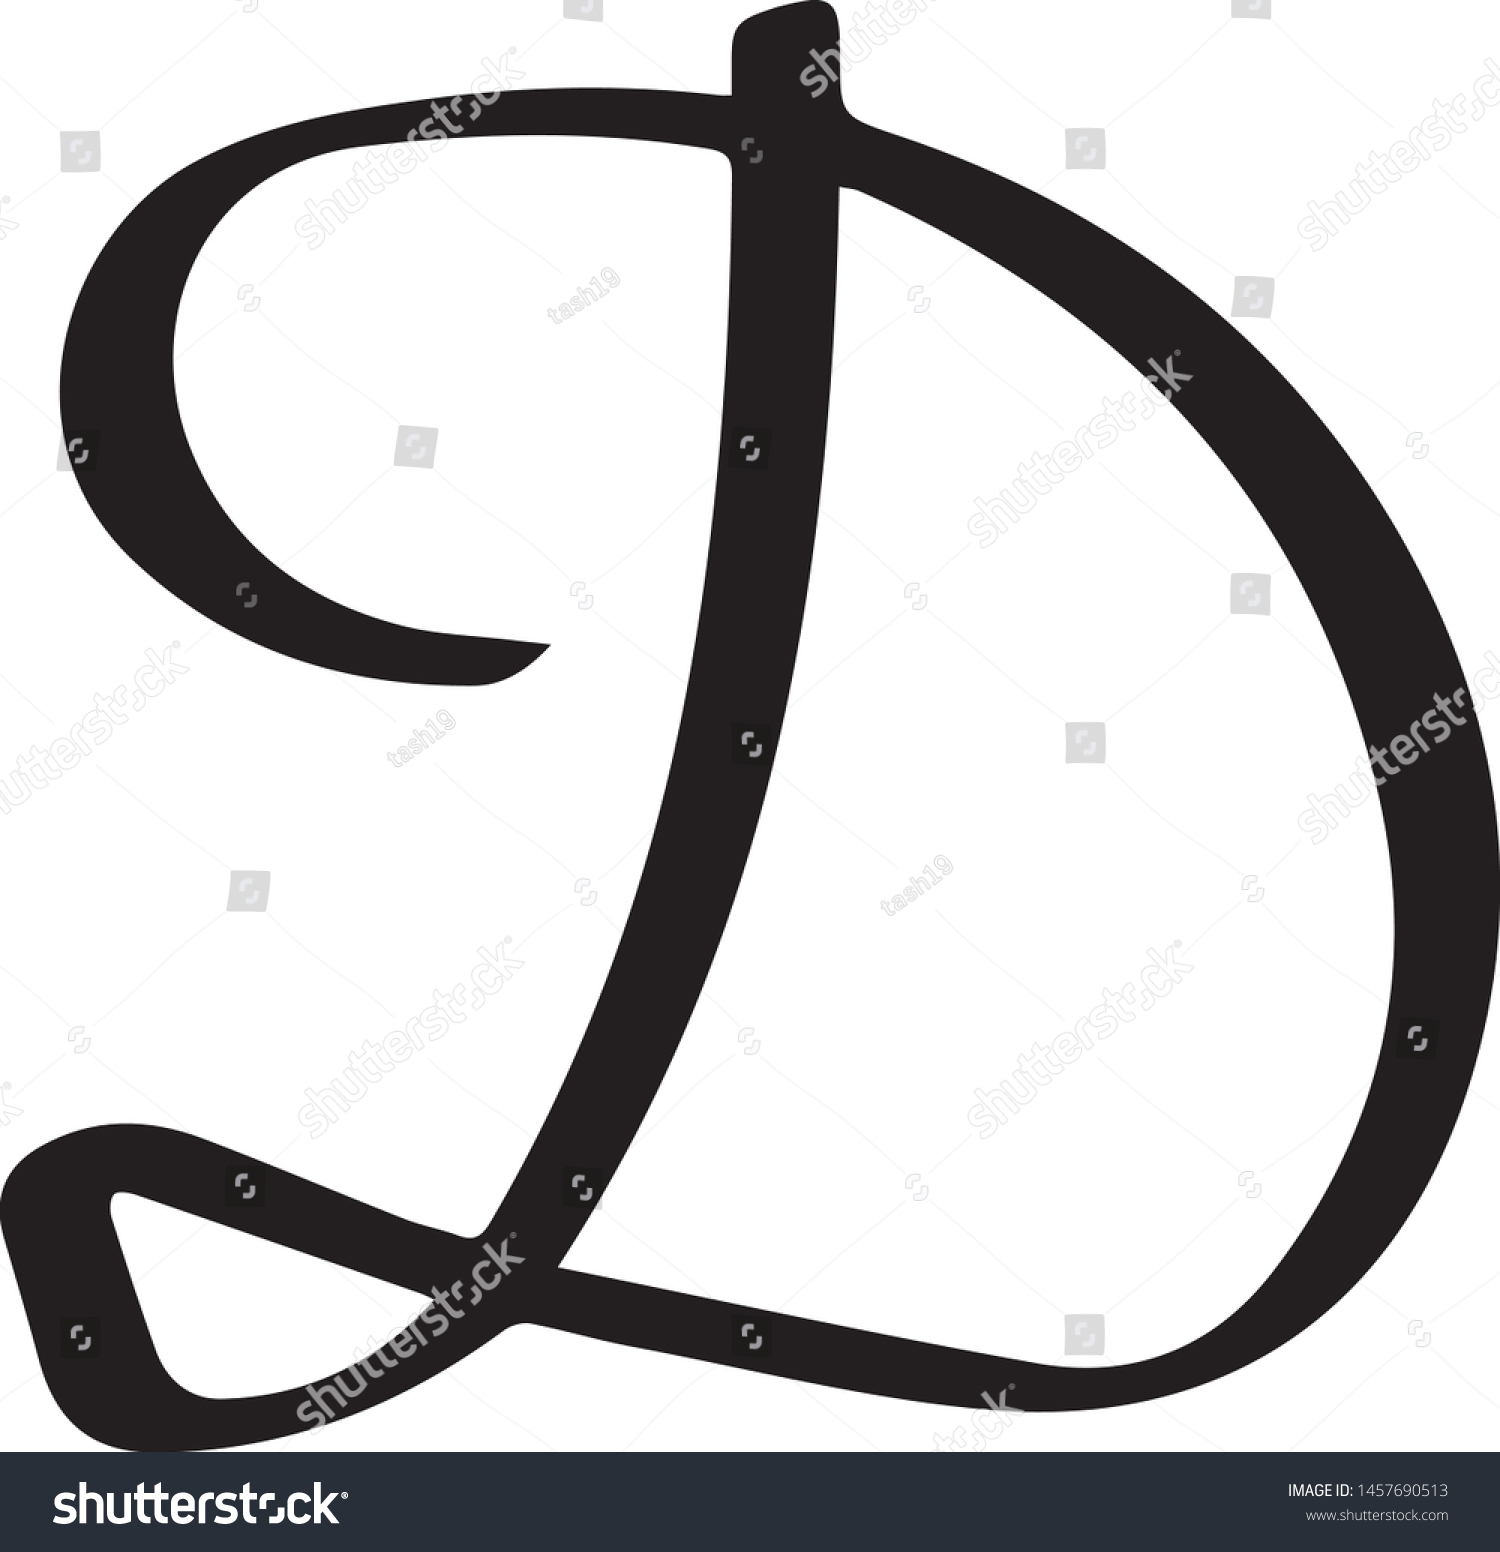 D Latin Font Letter Element Stock Vector (Royalty Free) 1457690513 ...